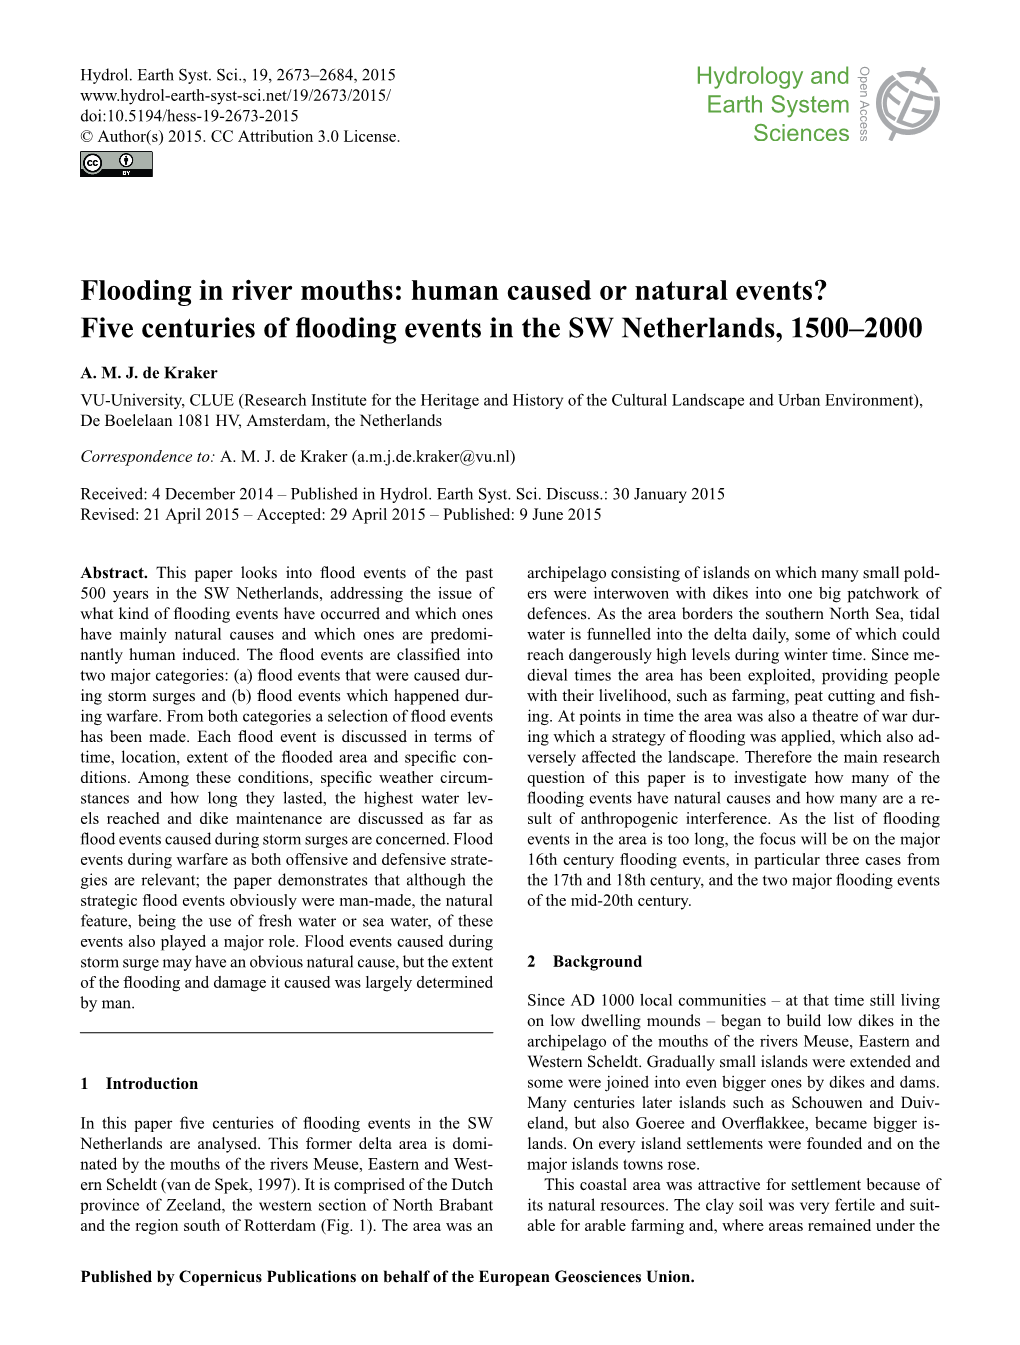 Flooding in River Mouths: Human Caused Or Natural Events? Five Centuries of Flooding Events in the SW Netherlands, 1500–2000